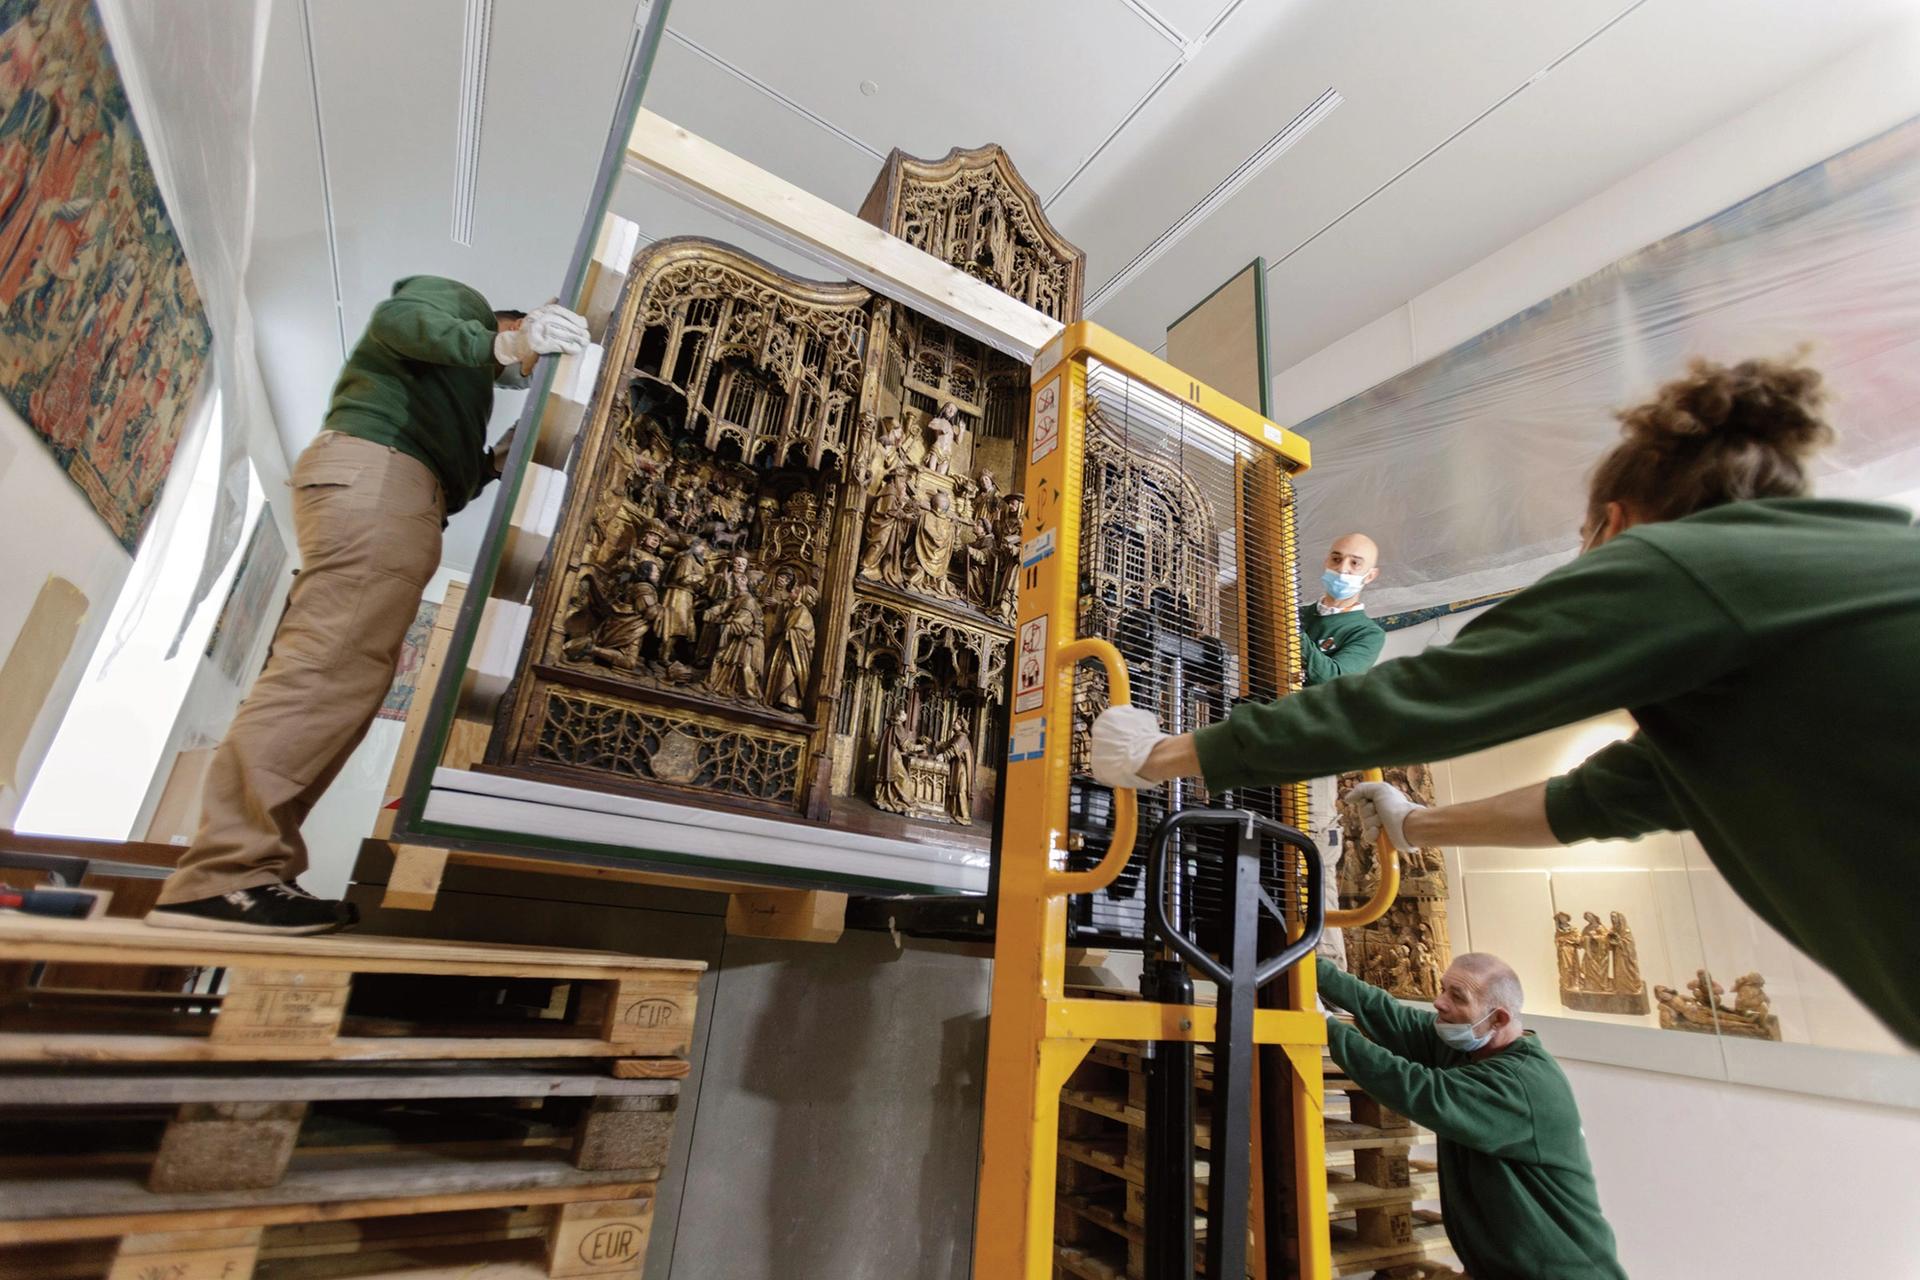 Workers move an altarpiece into place in one of the newly renovated galleries at the Musée de Cluny. Around 500 works from the museum’s collection have been restored in time for the reopening © Michel Bourguet/Musée de Cluny